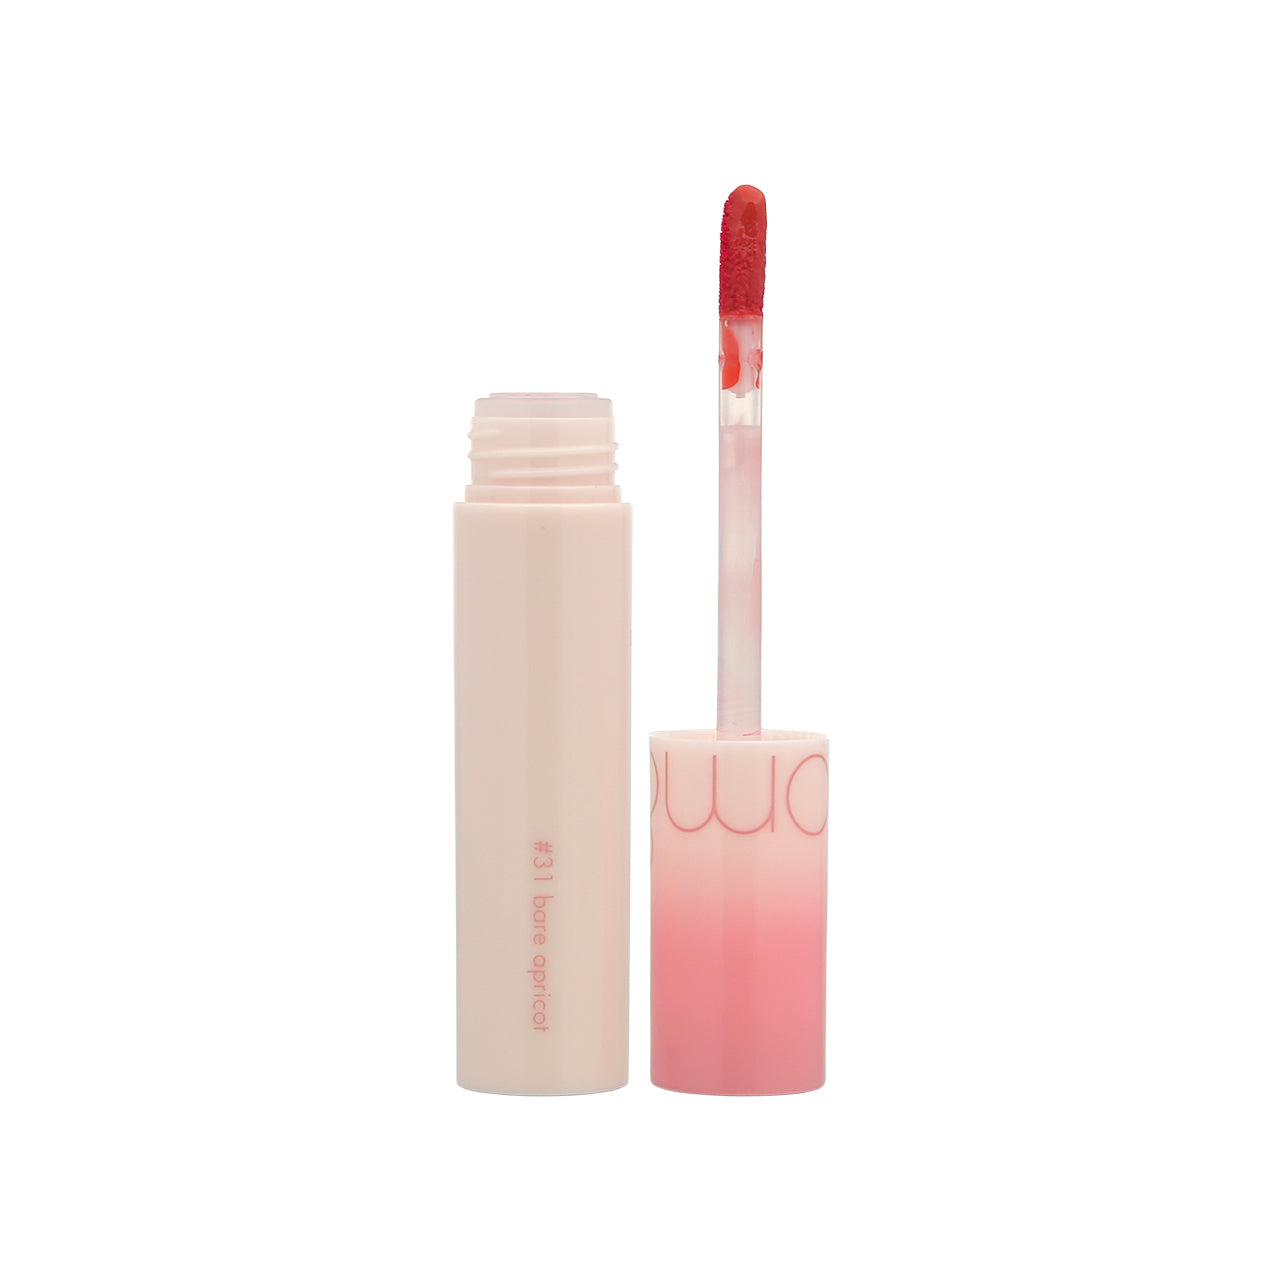 Rom&nd Juicy Lasting Tint (#31 Bare Apricot) 5.5g